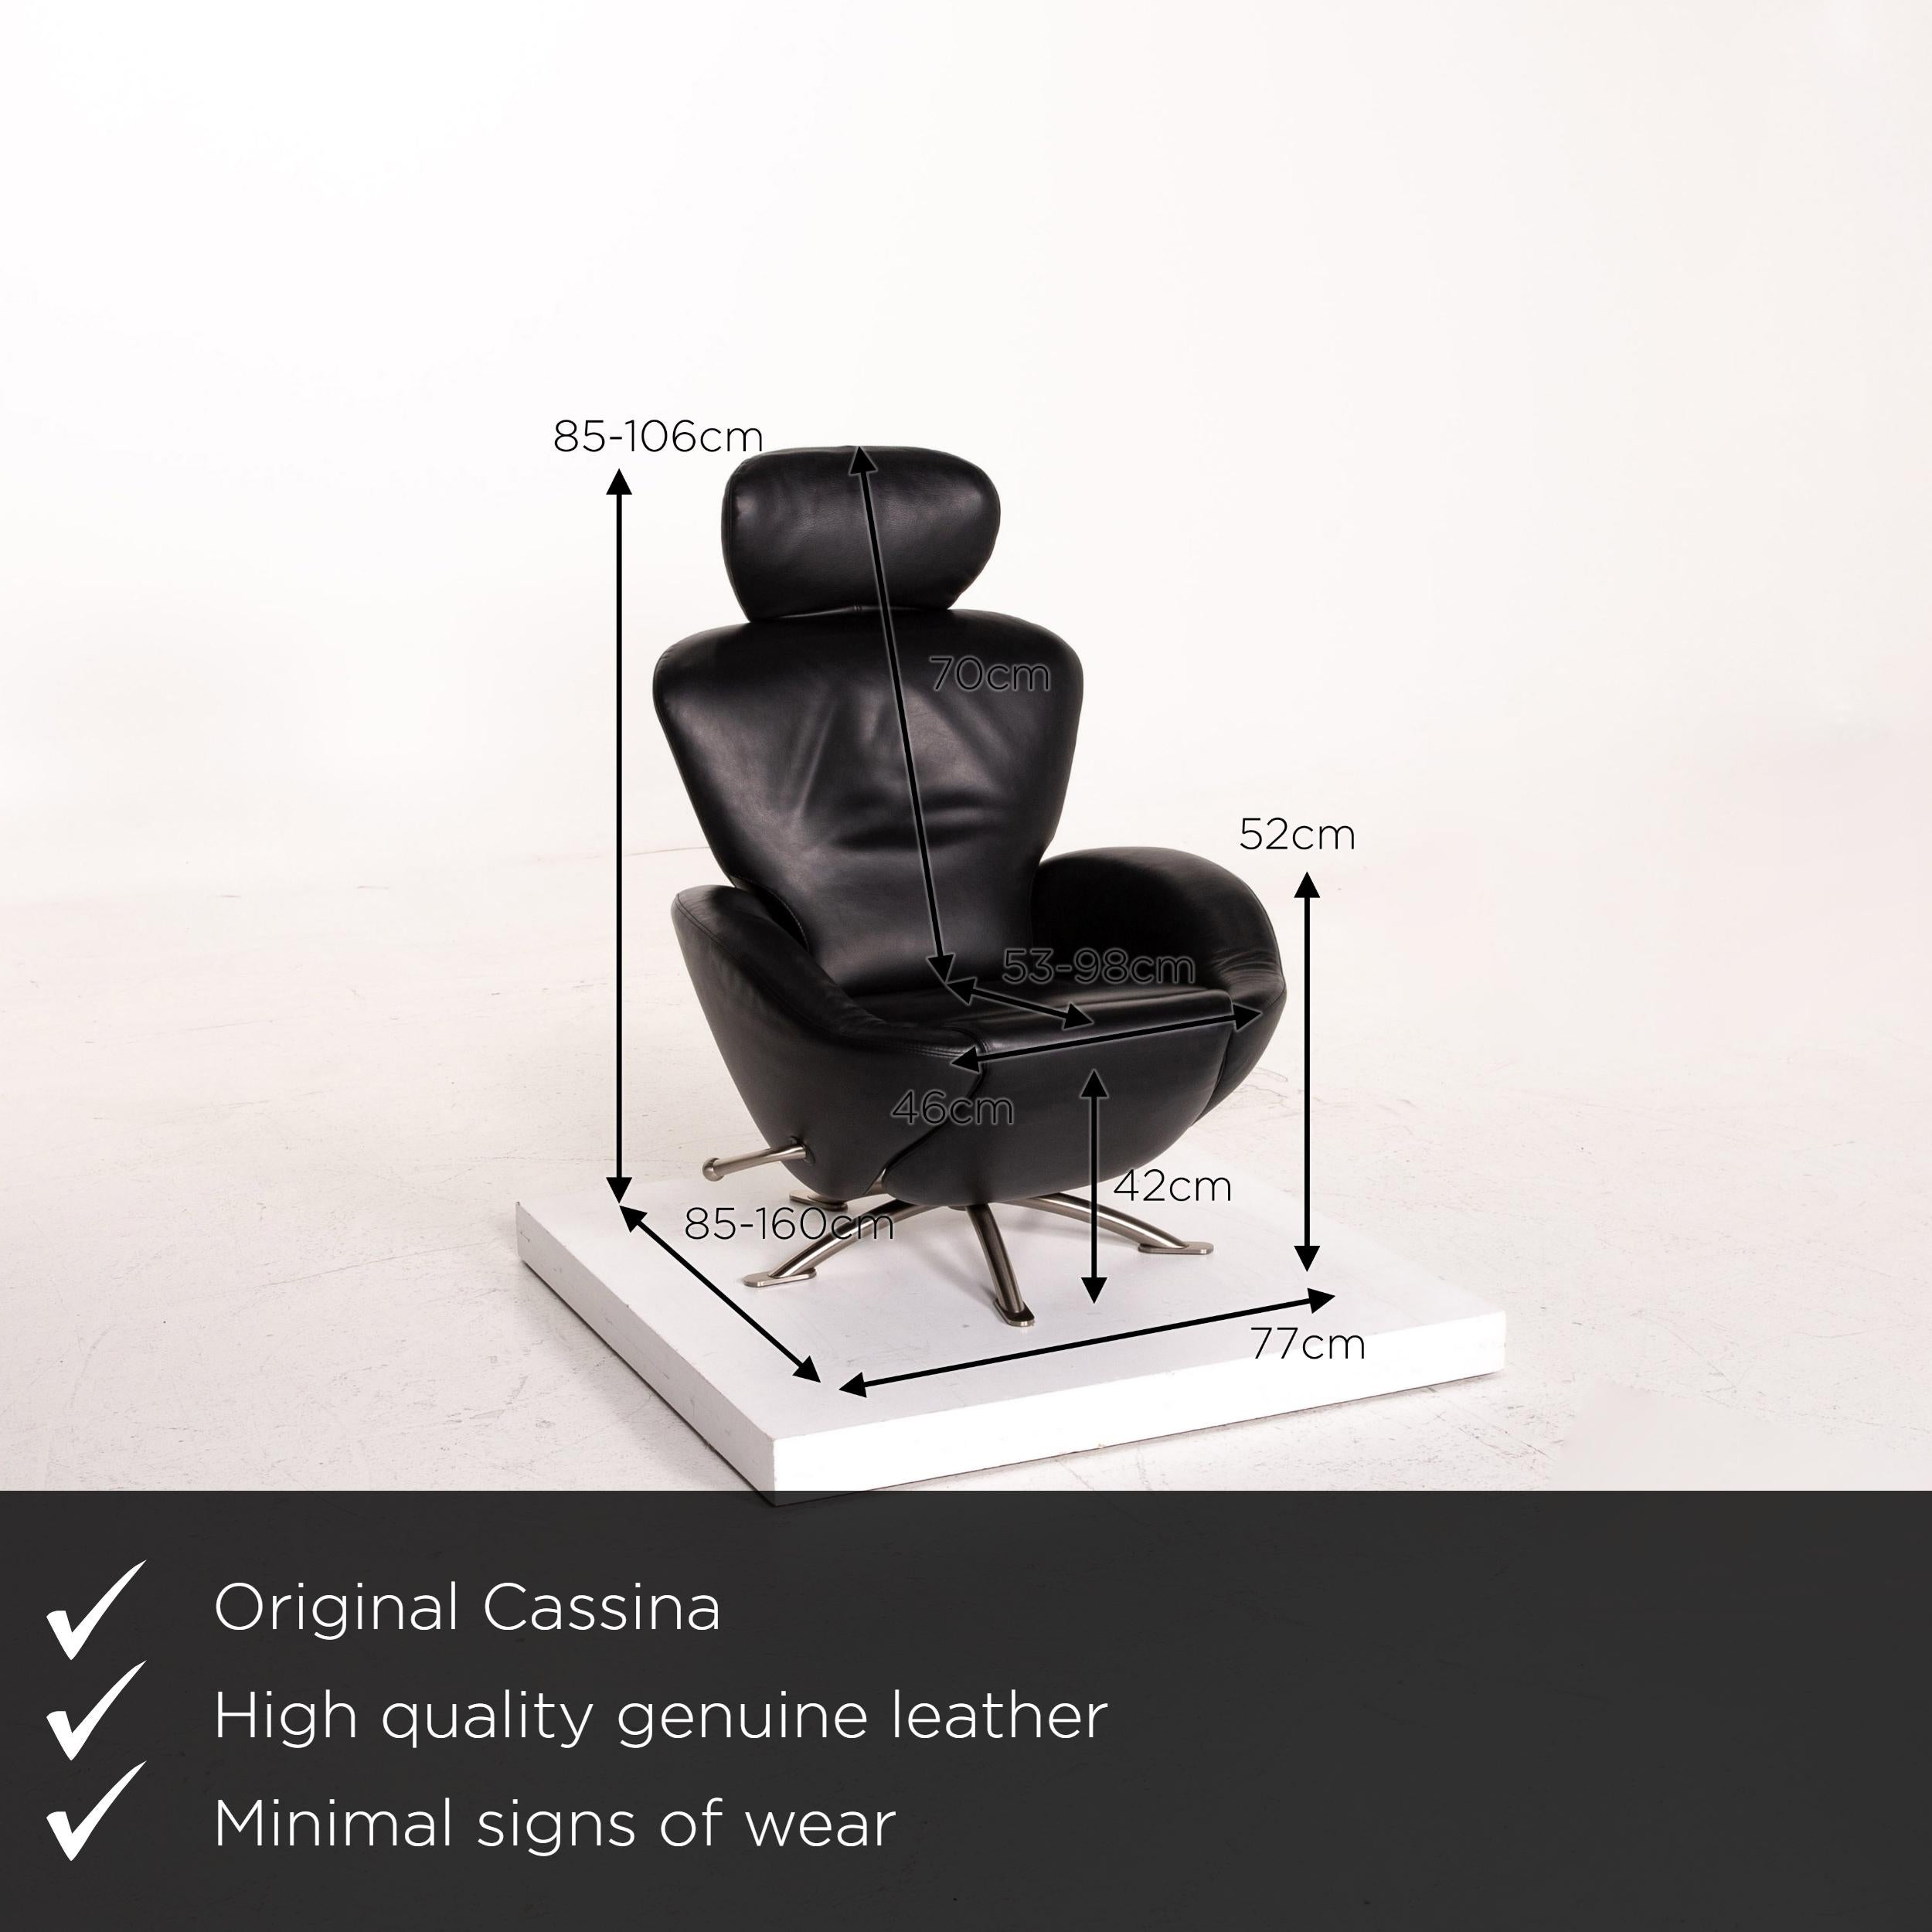 We present to you a Cassina Dodo leather armchair black relaxation function function relaxation.
 

 Product measurements in centimeters:
 

Depth: 85
Width: 77
Height: 106
Seat height: 42
Rest height: 52
Seat depth: 53
Seat width: